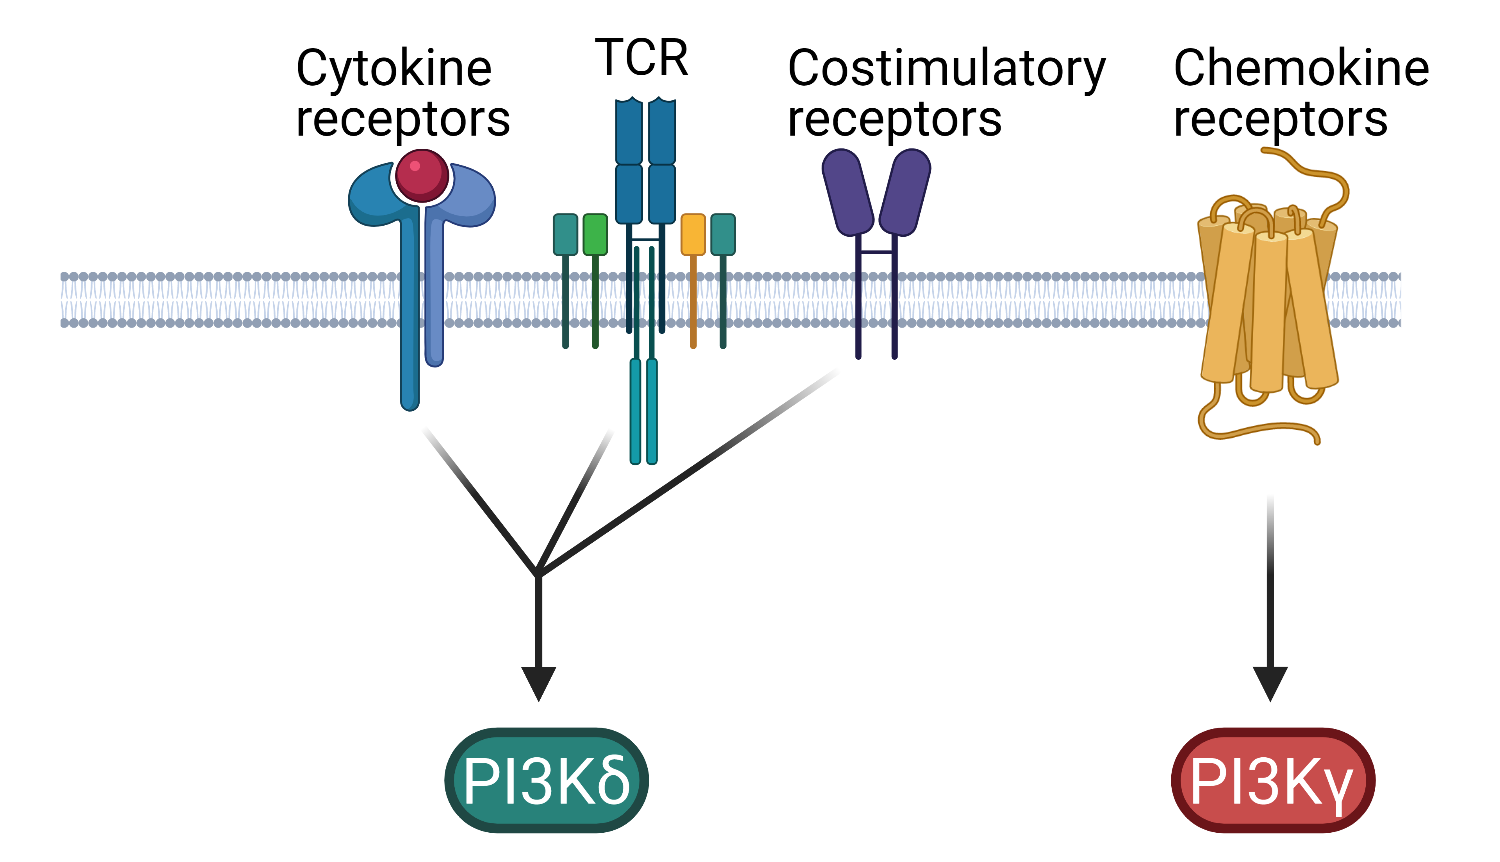 T cell activation of PI3Kd and PI3Kg